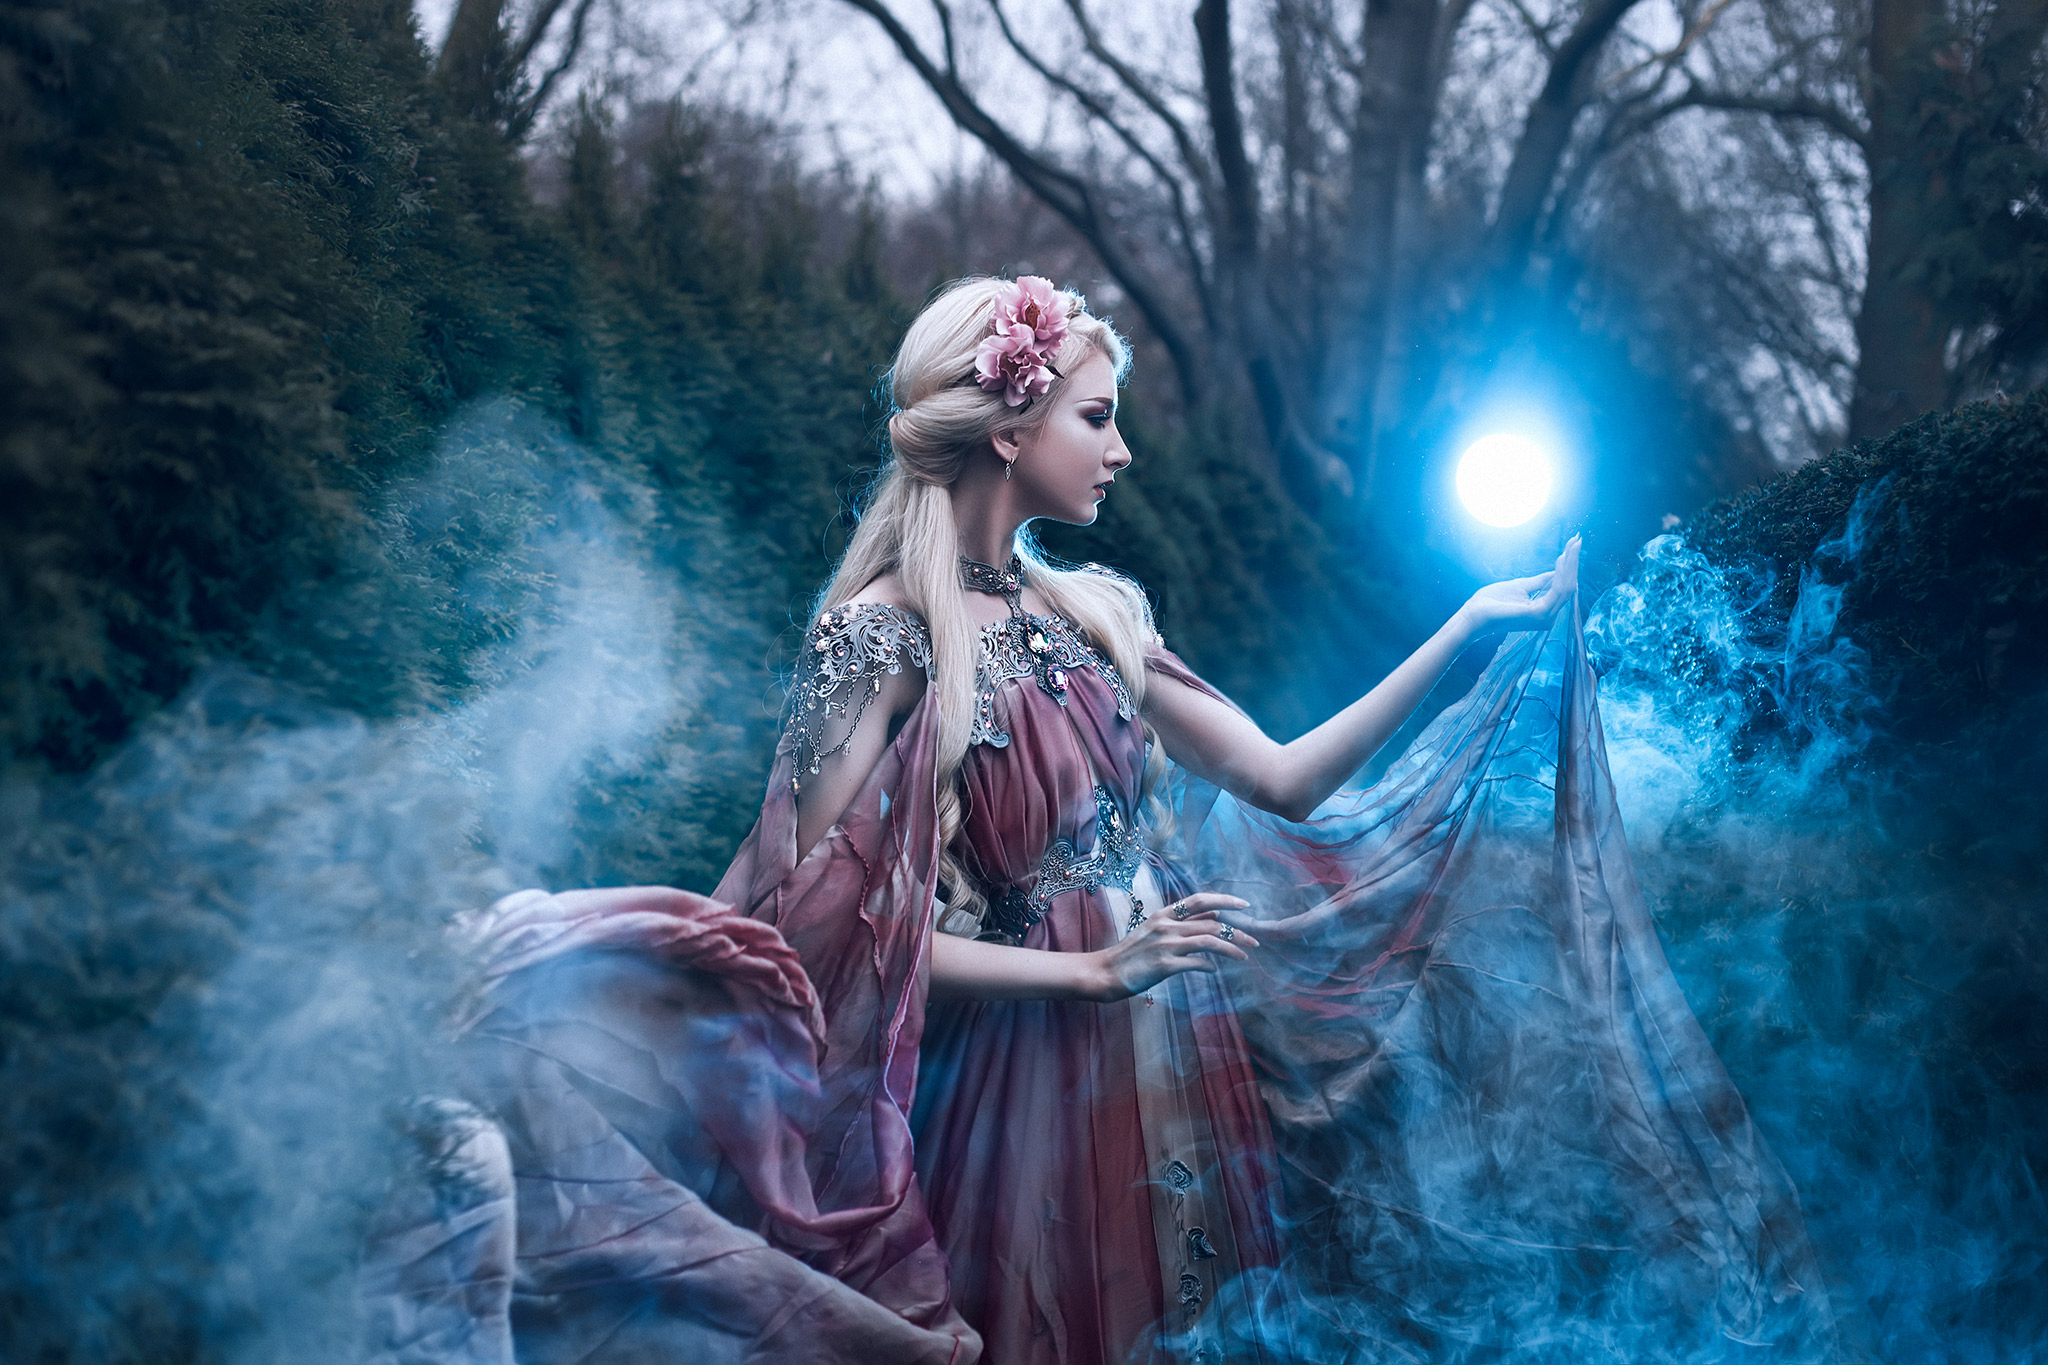  IV. Lighting Techniques for Ethereal and Fantasy Photography